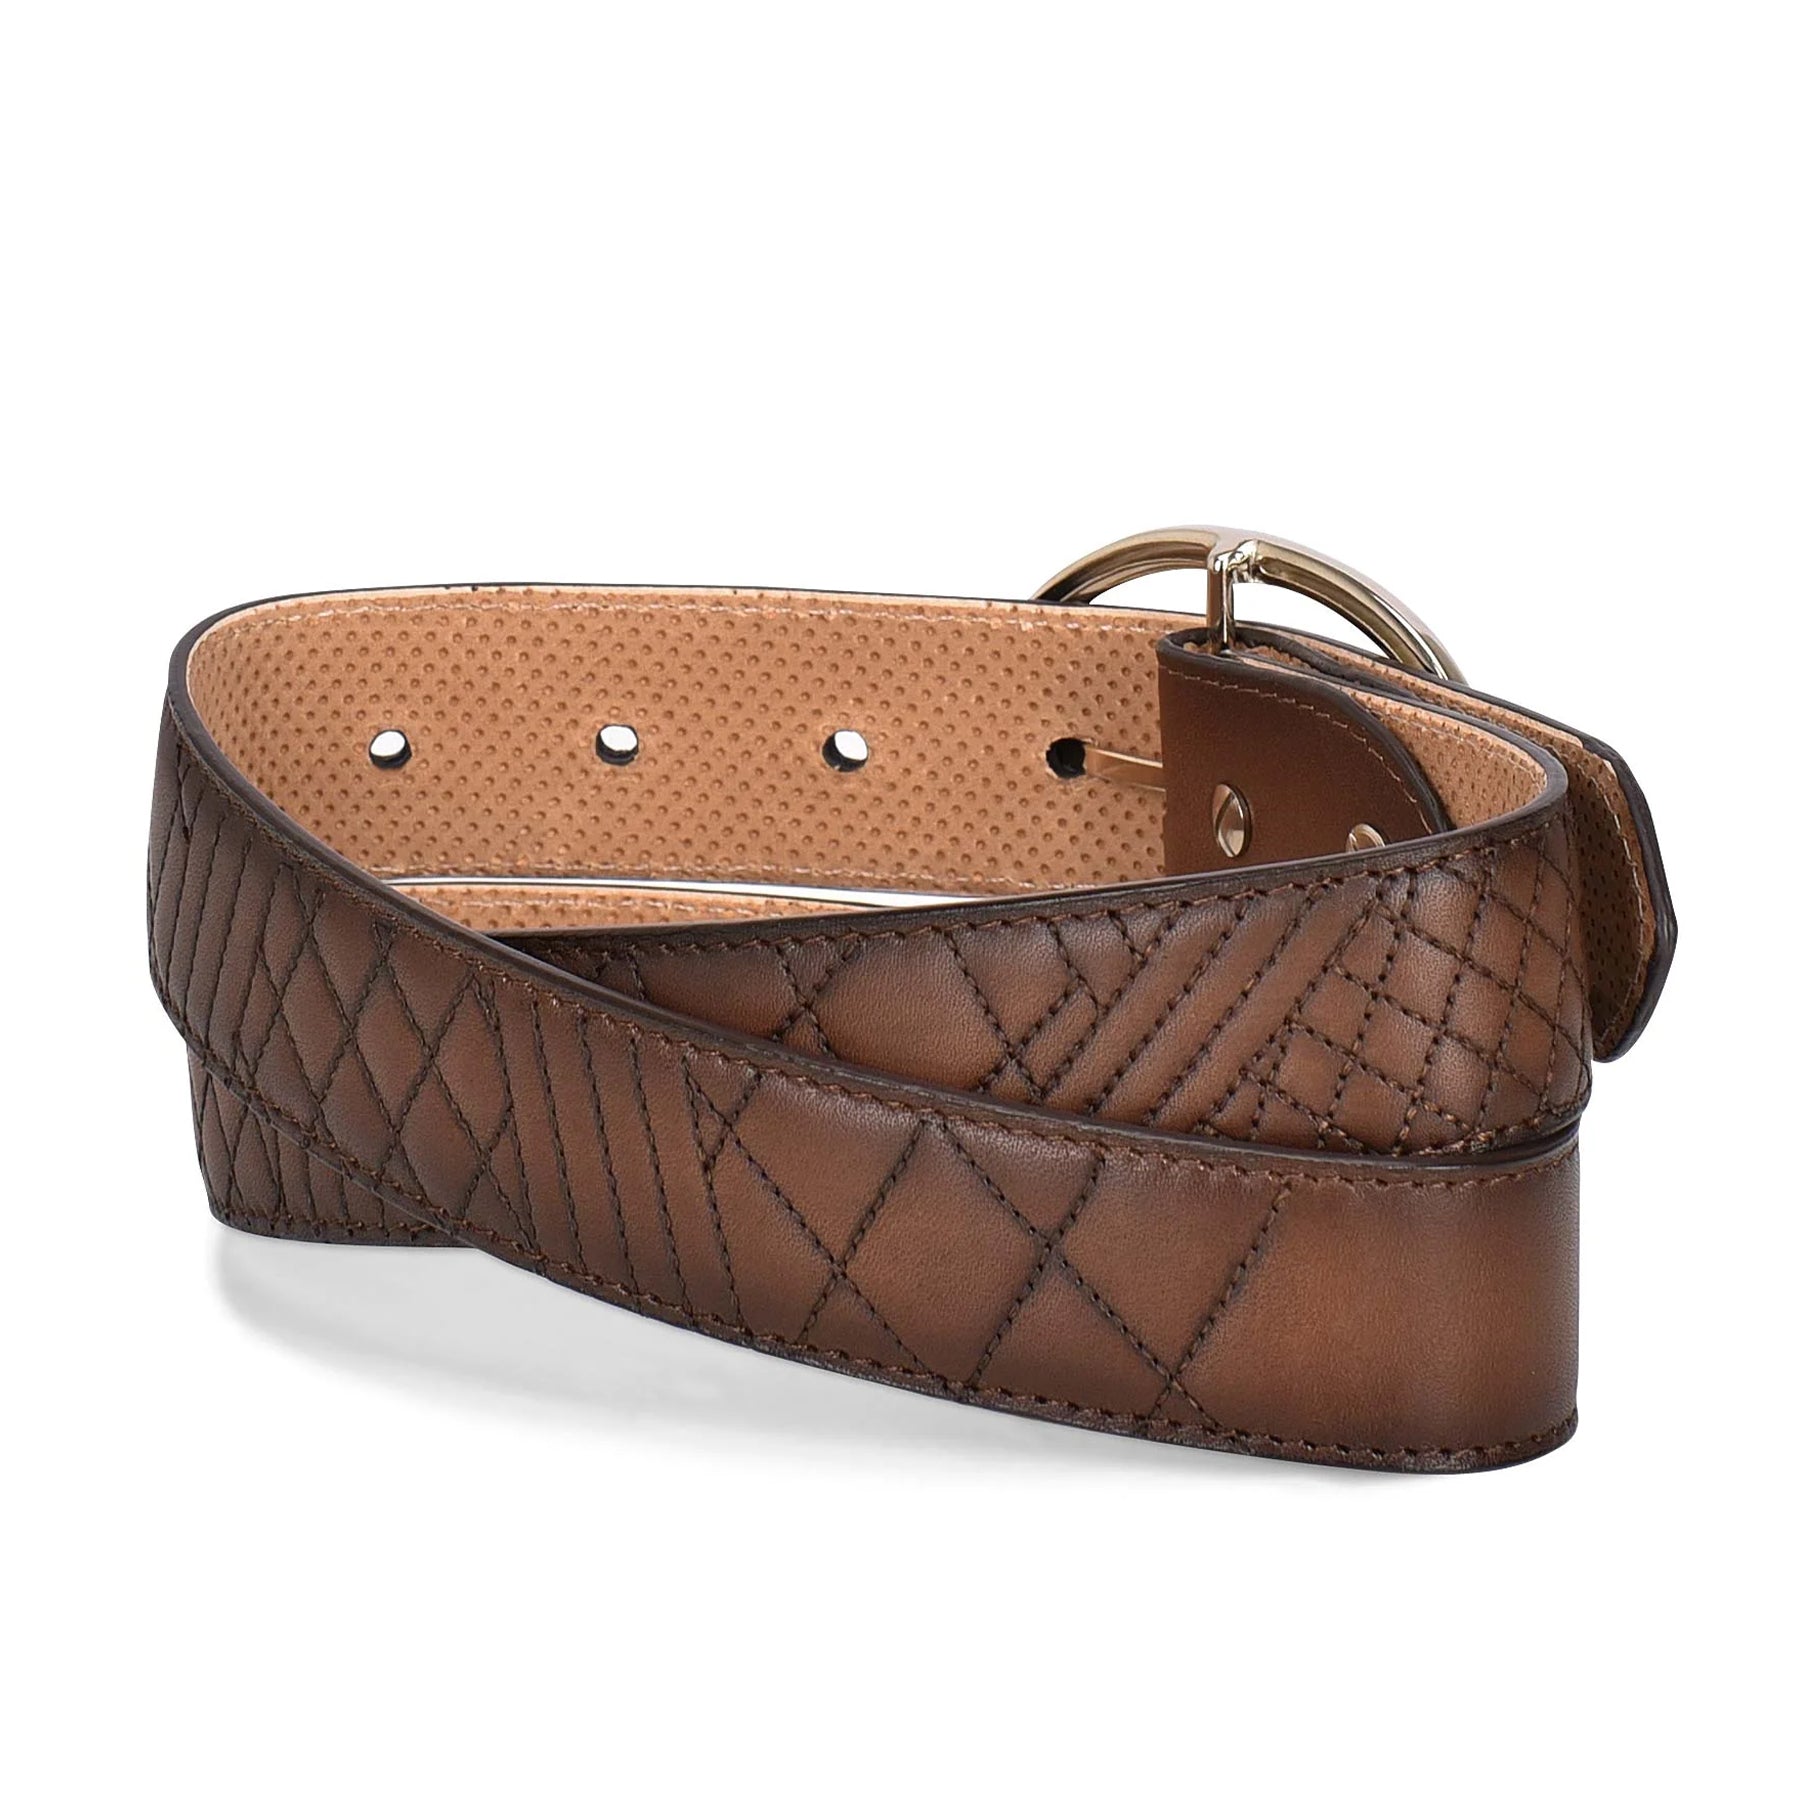 Ladies Embroidered Brown Leather Belt